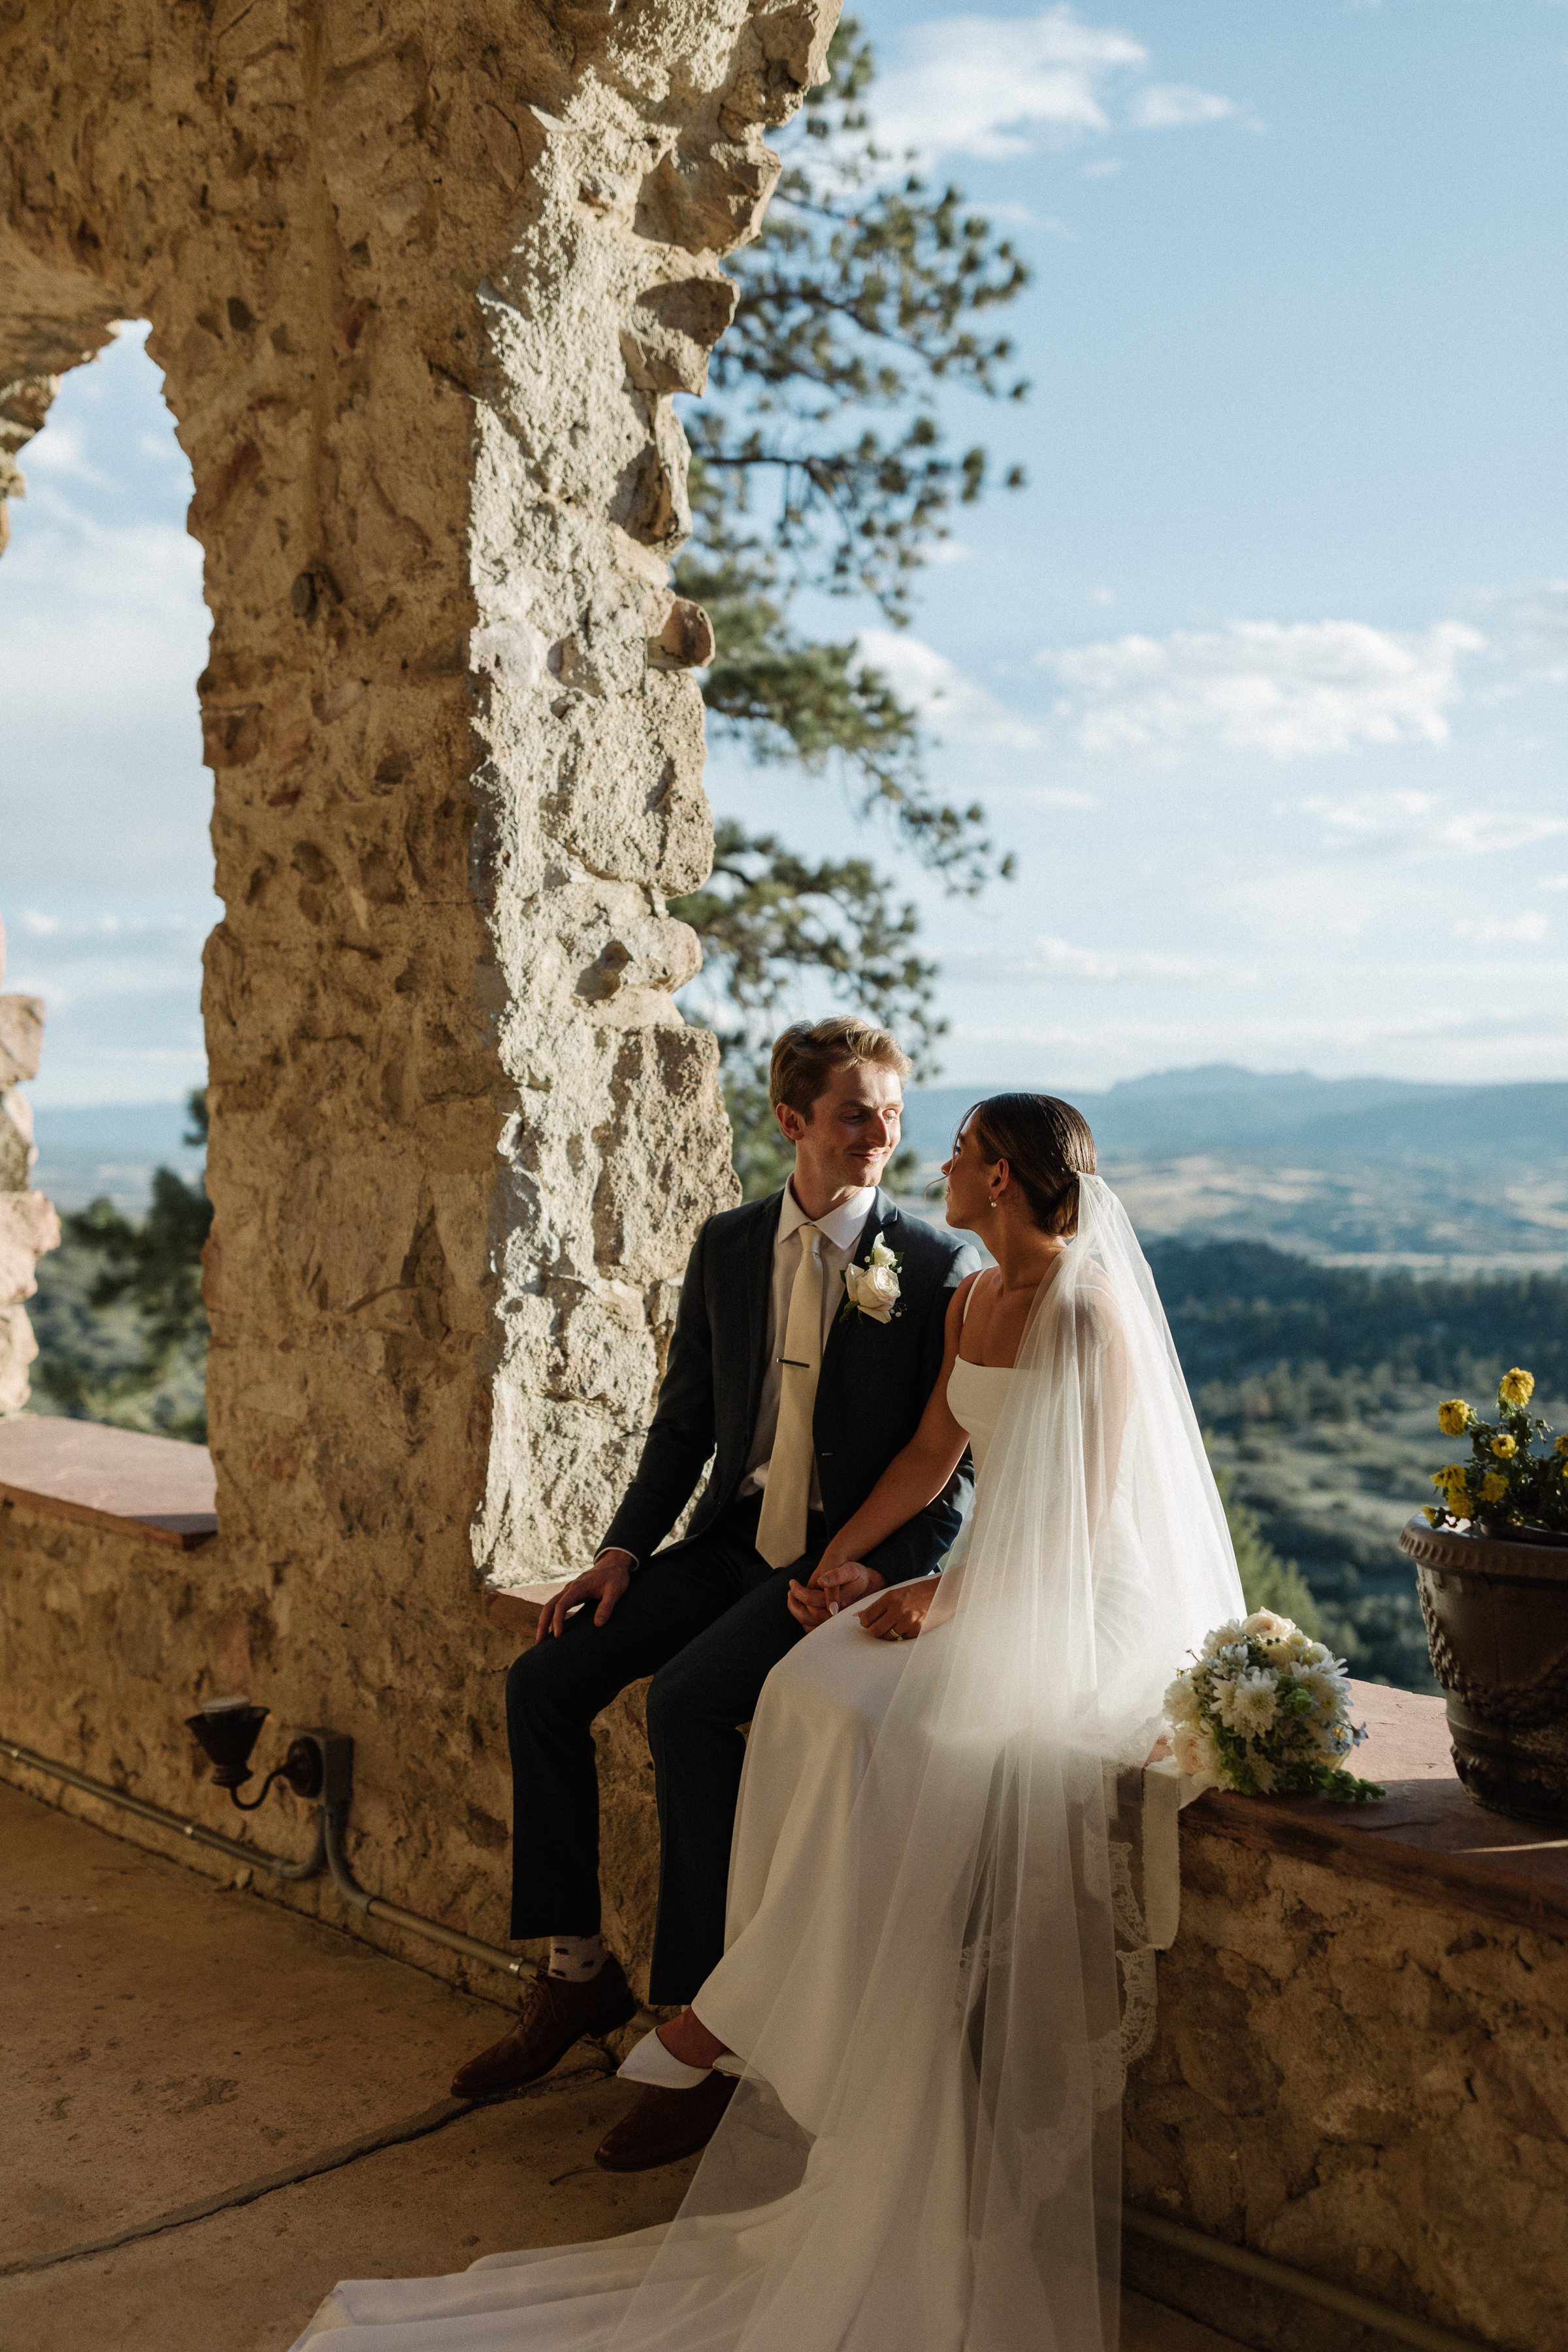 Stunning wedding photos with bride and groom overlooking lush mountain landscape